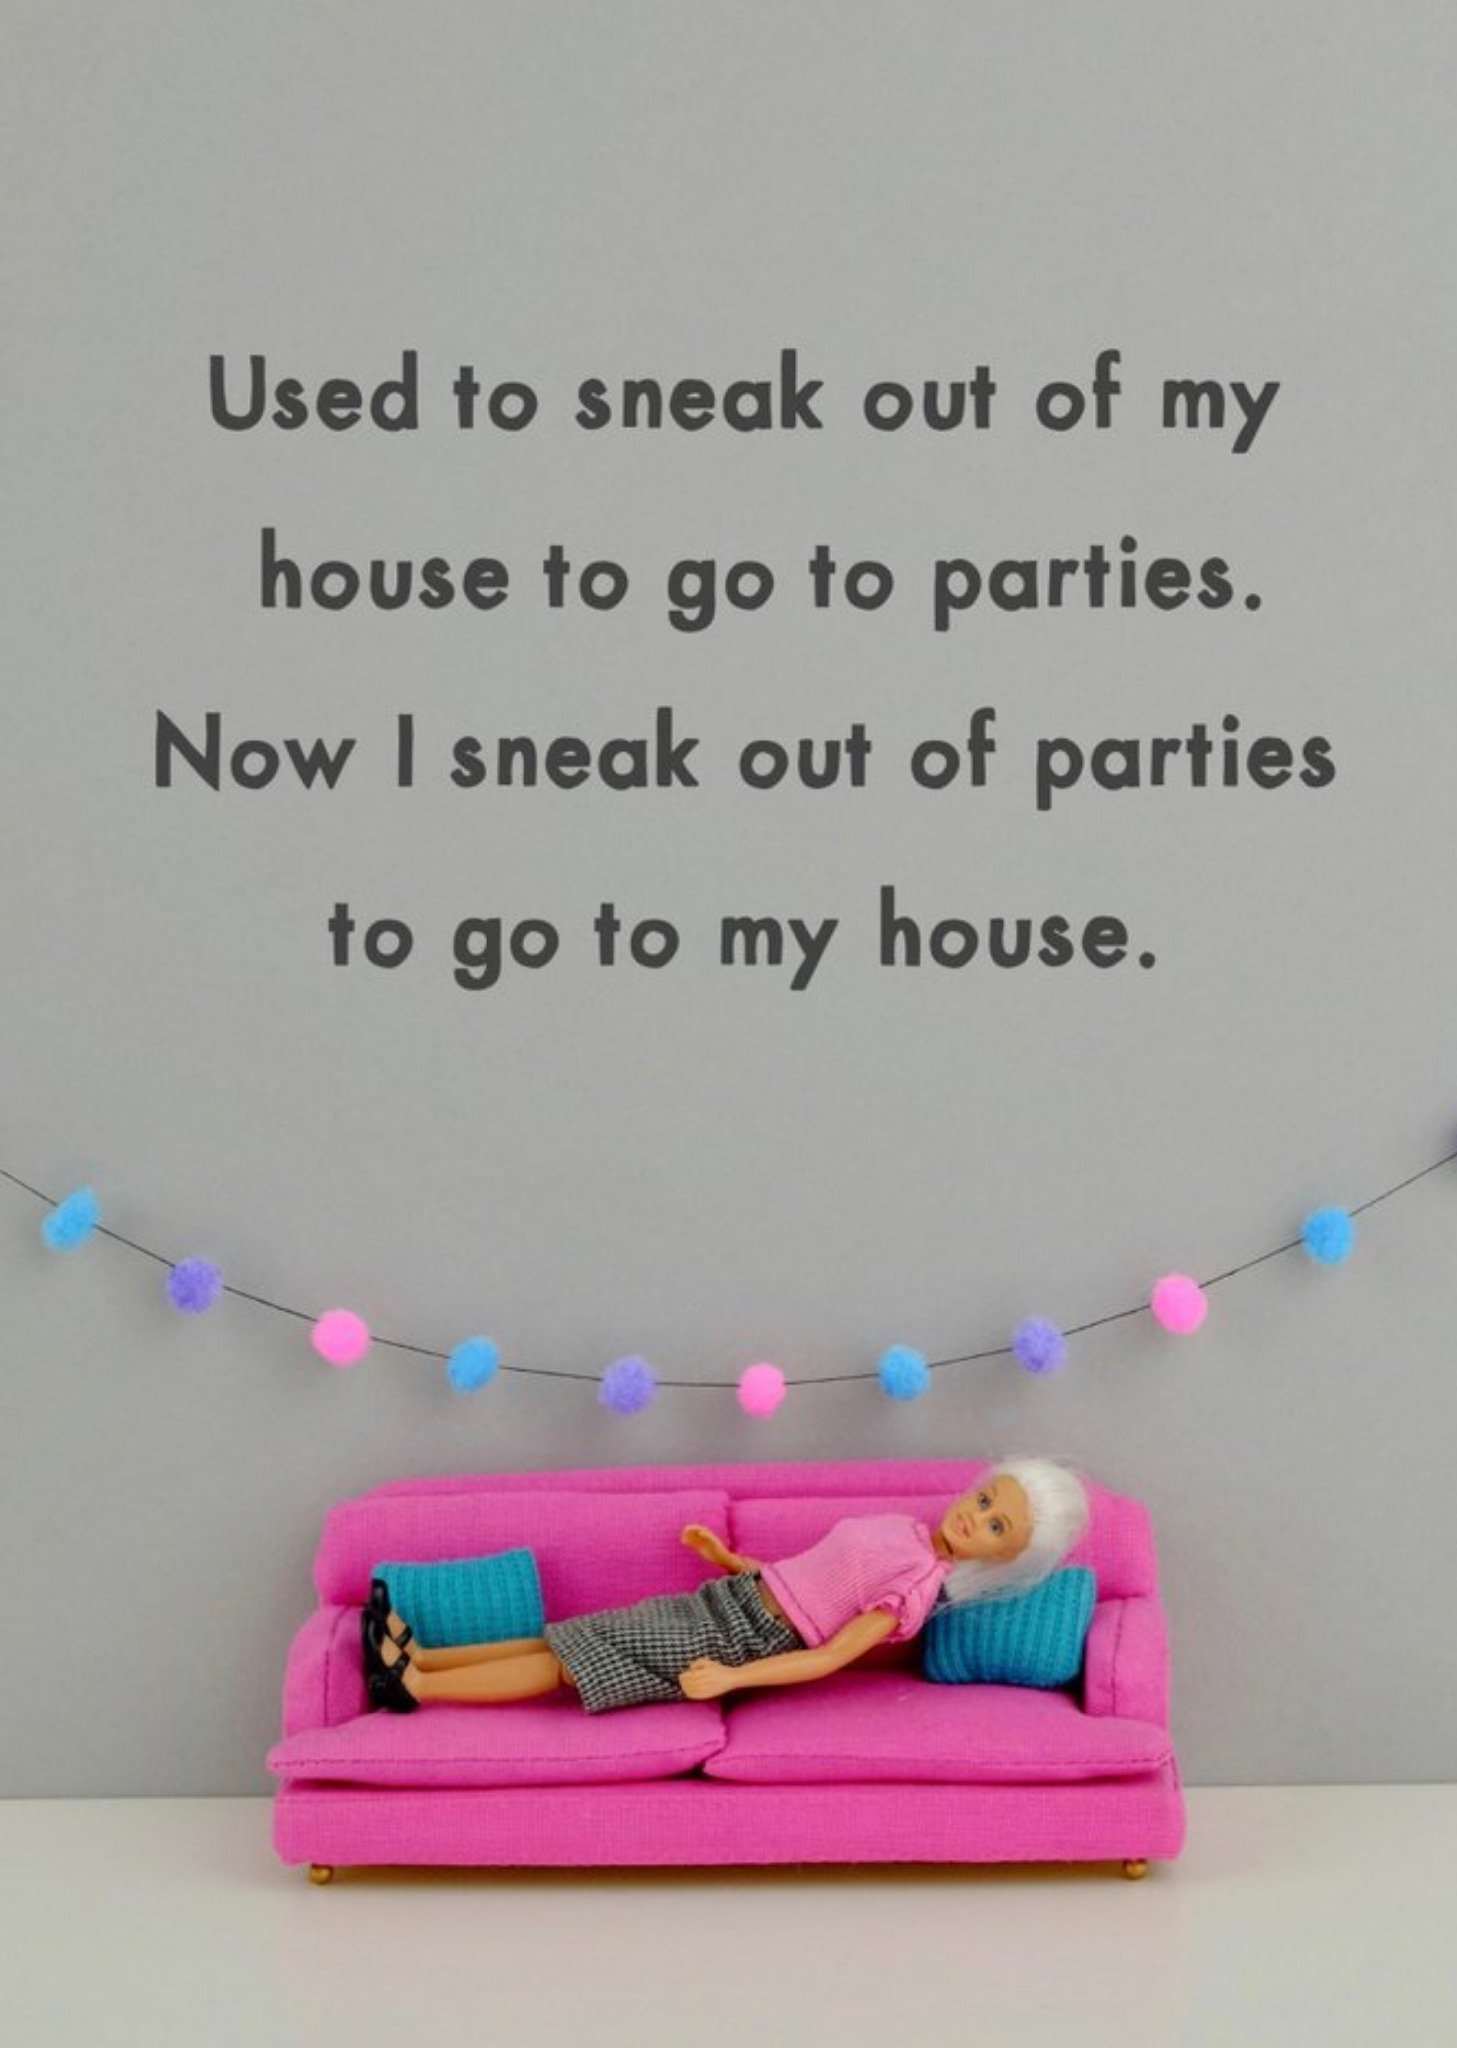 Bold And Bright Funny Dolls Now I Sneak Out Of Parties To Go To My House Birthday Card Ecard